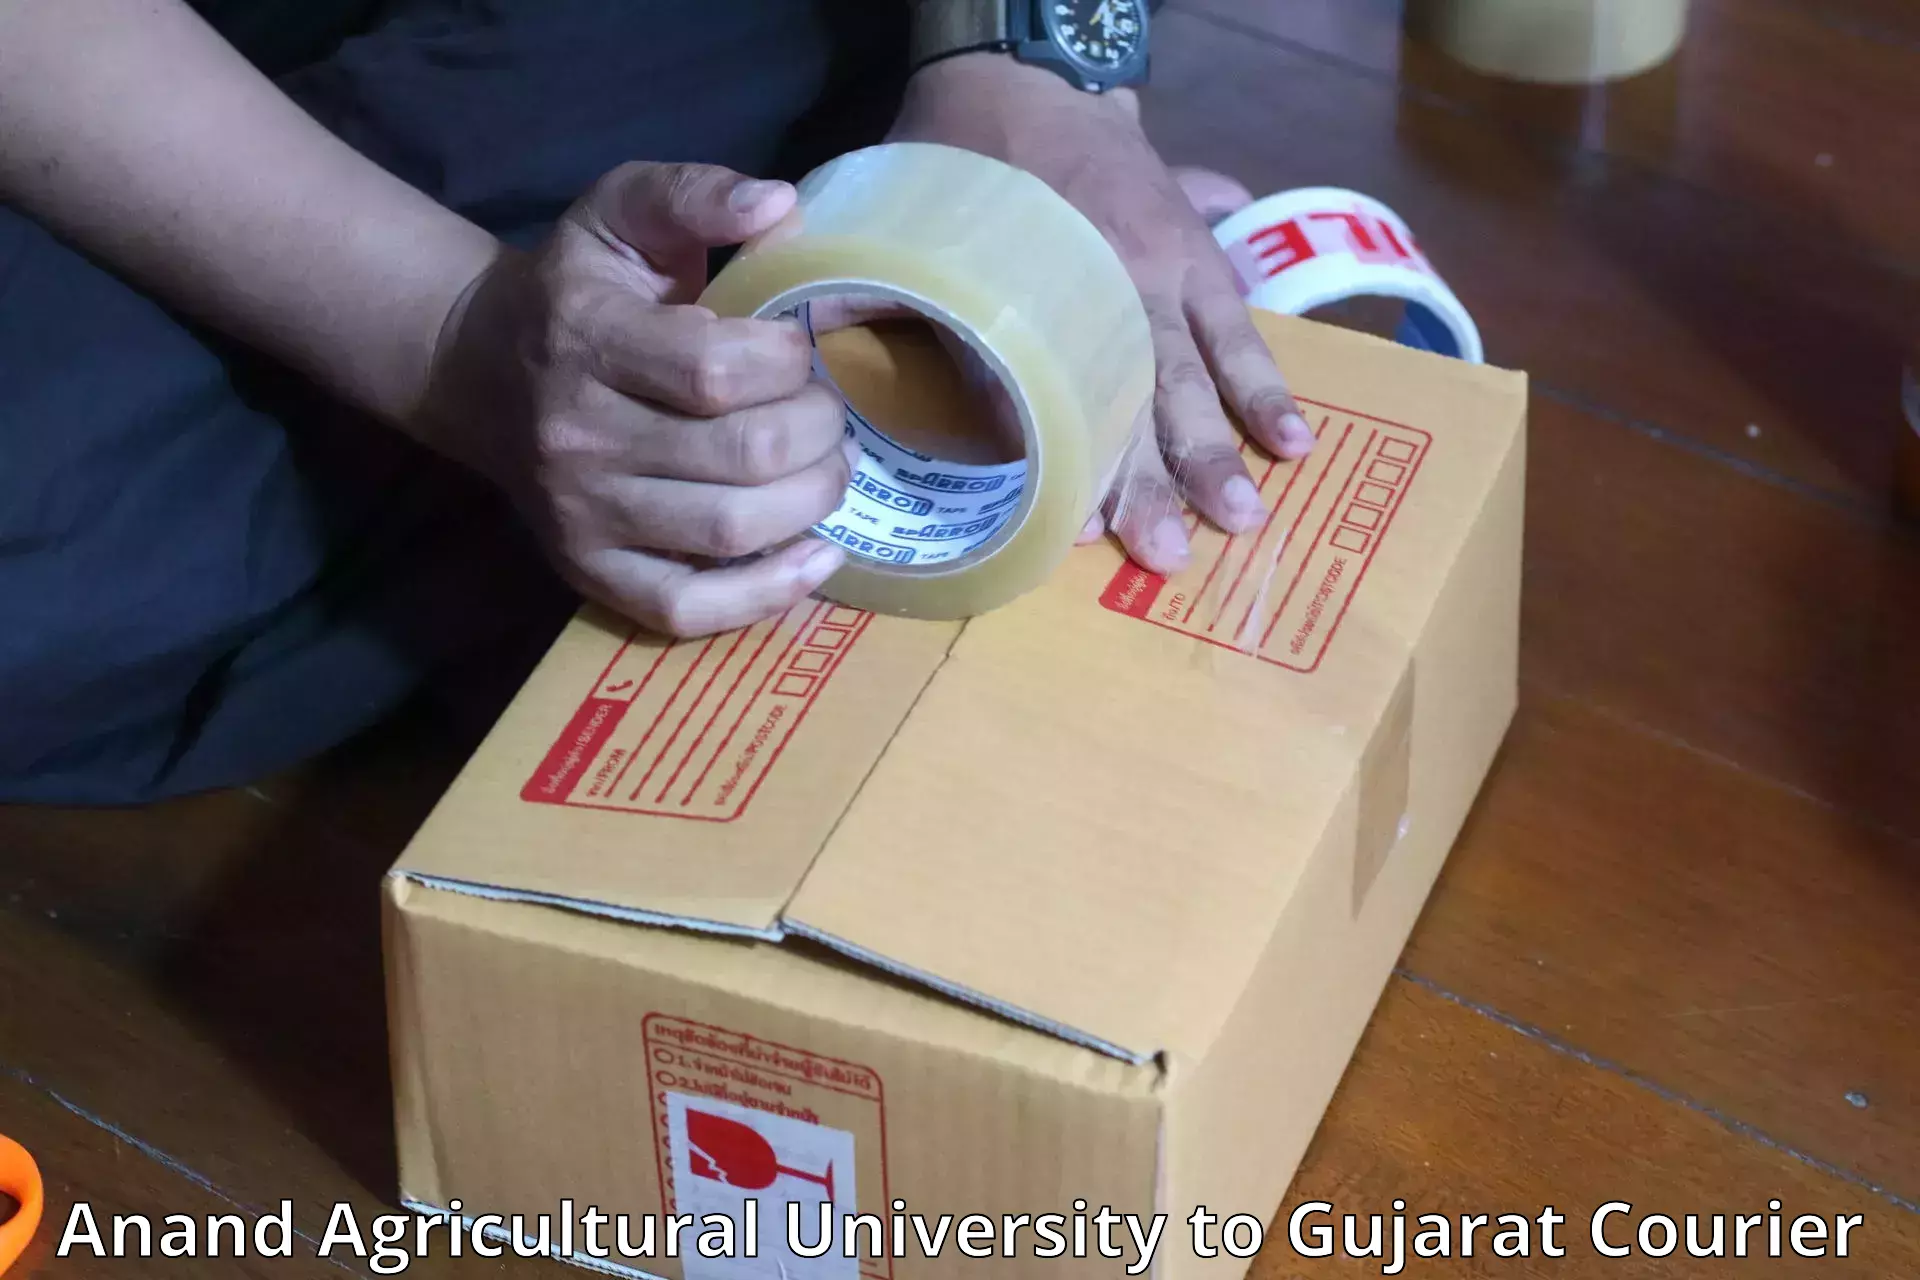 High-quality baggage shipment Anand Agricultural University to Palitana